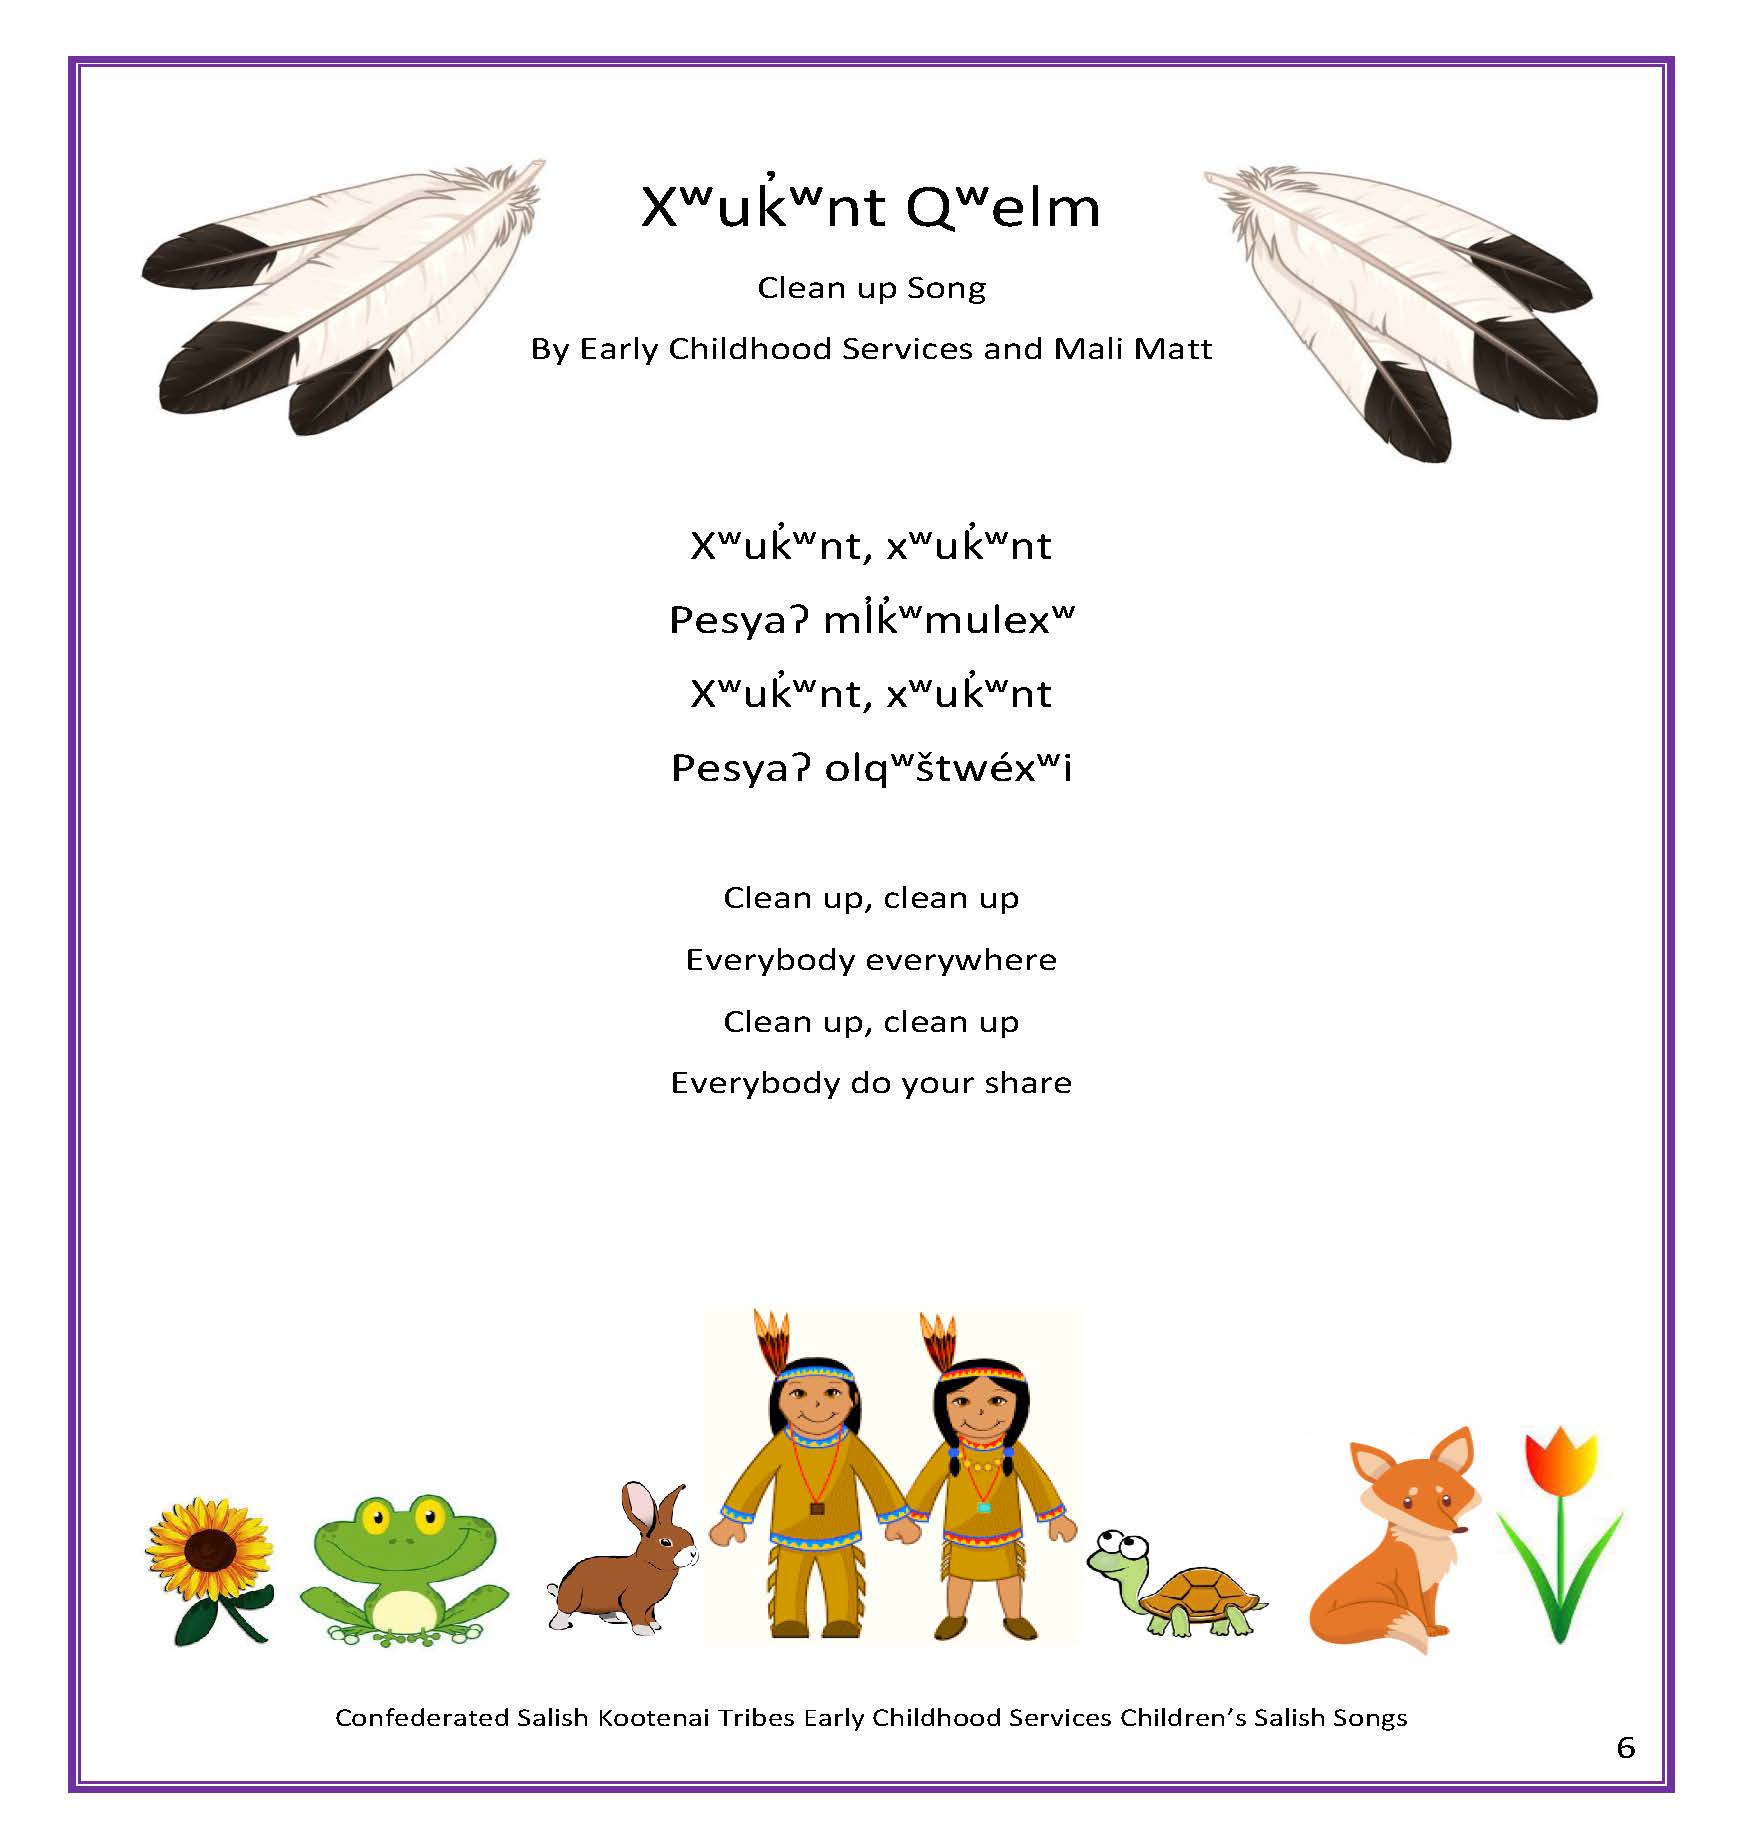 ECS Childrens Salish Song Book Page 11